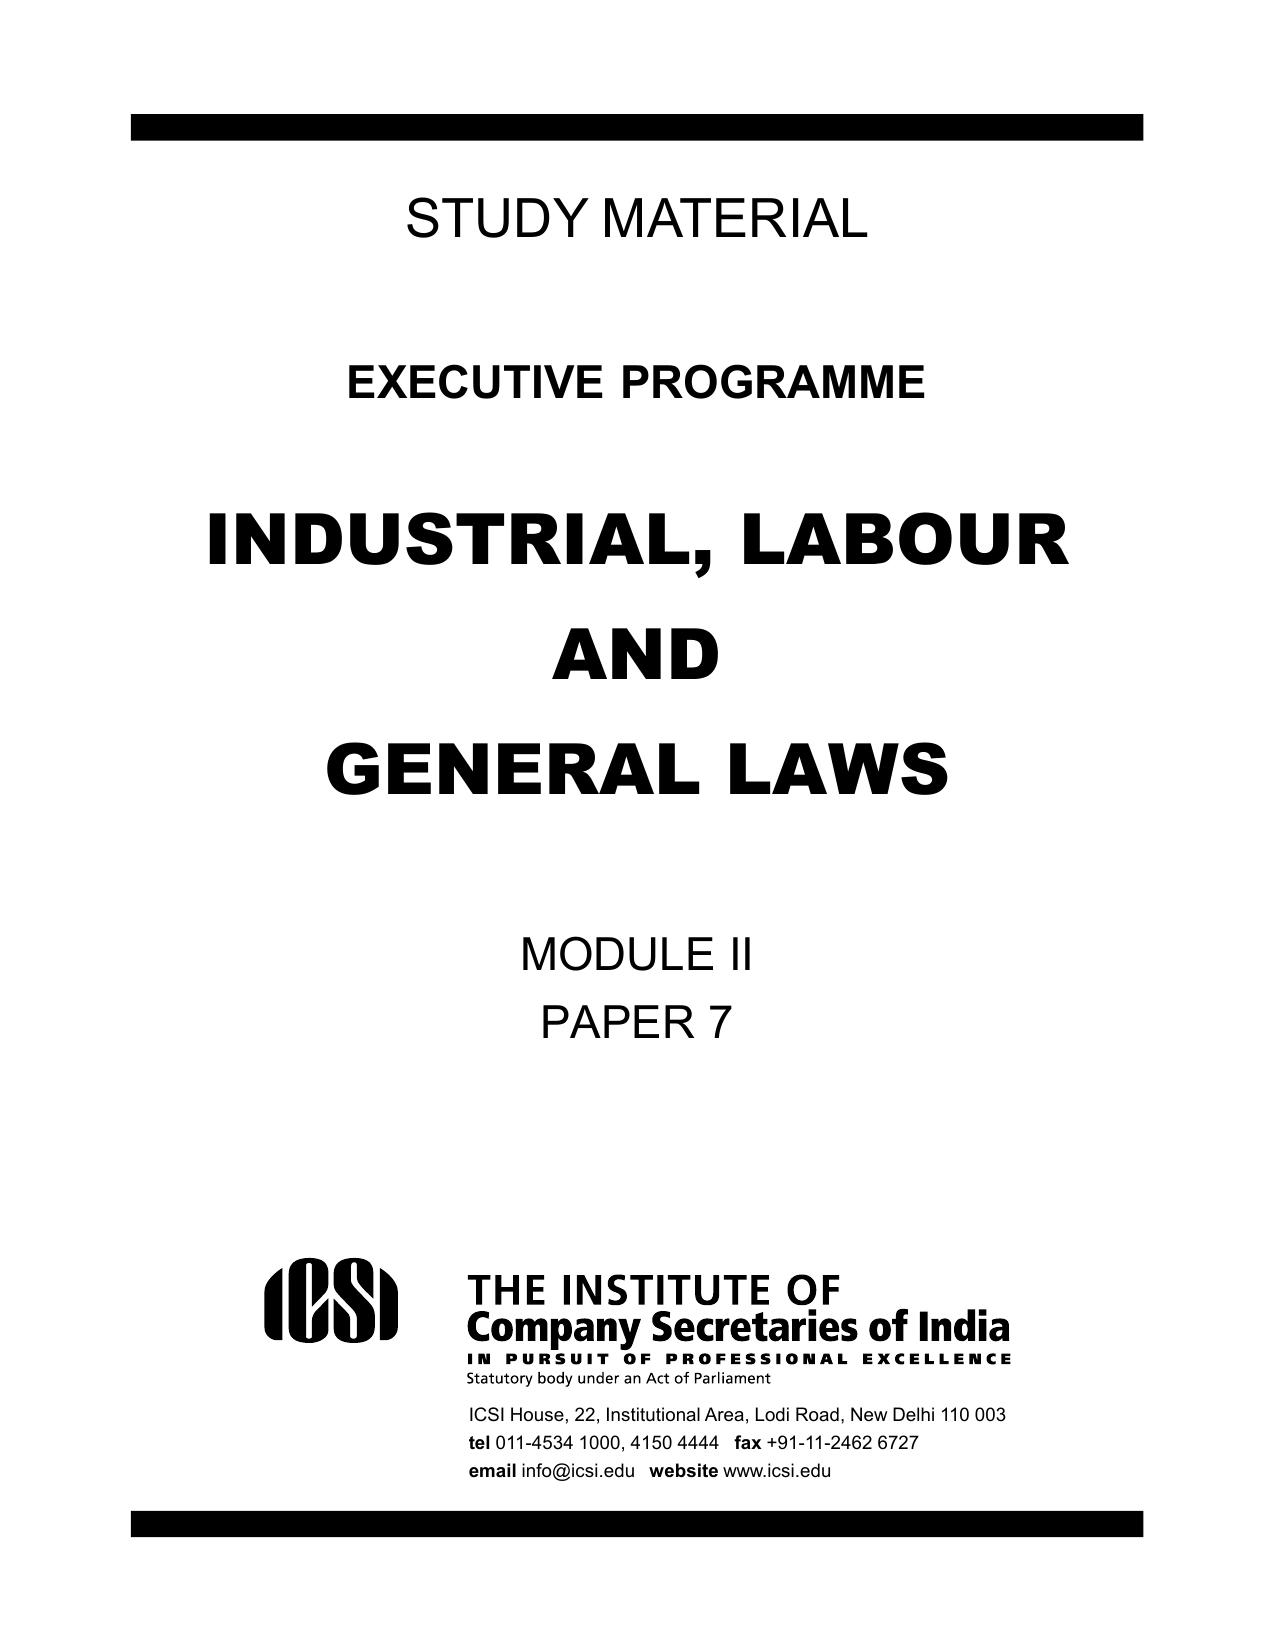 7. Industrial, Labour and General Laws 2014